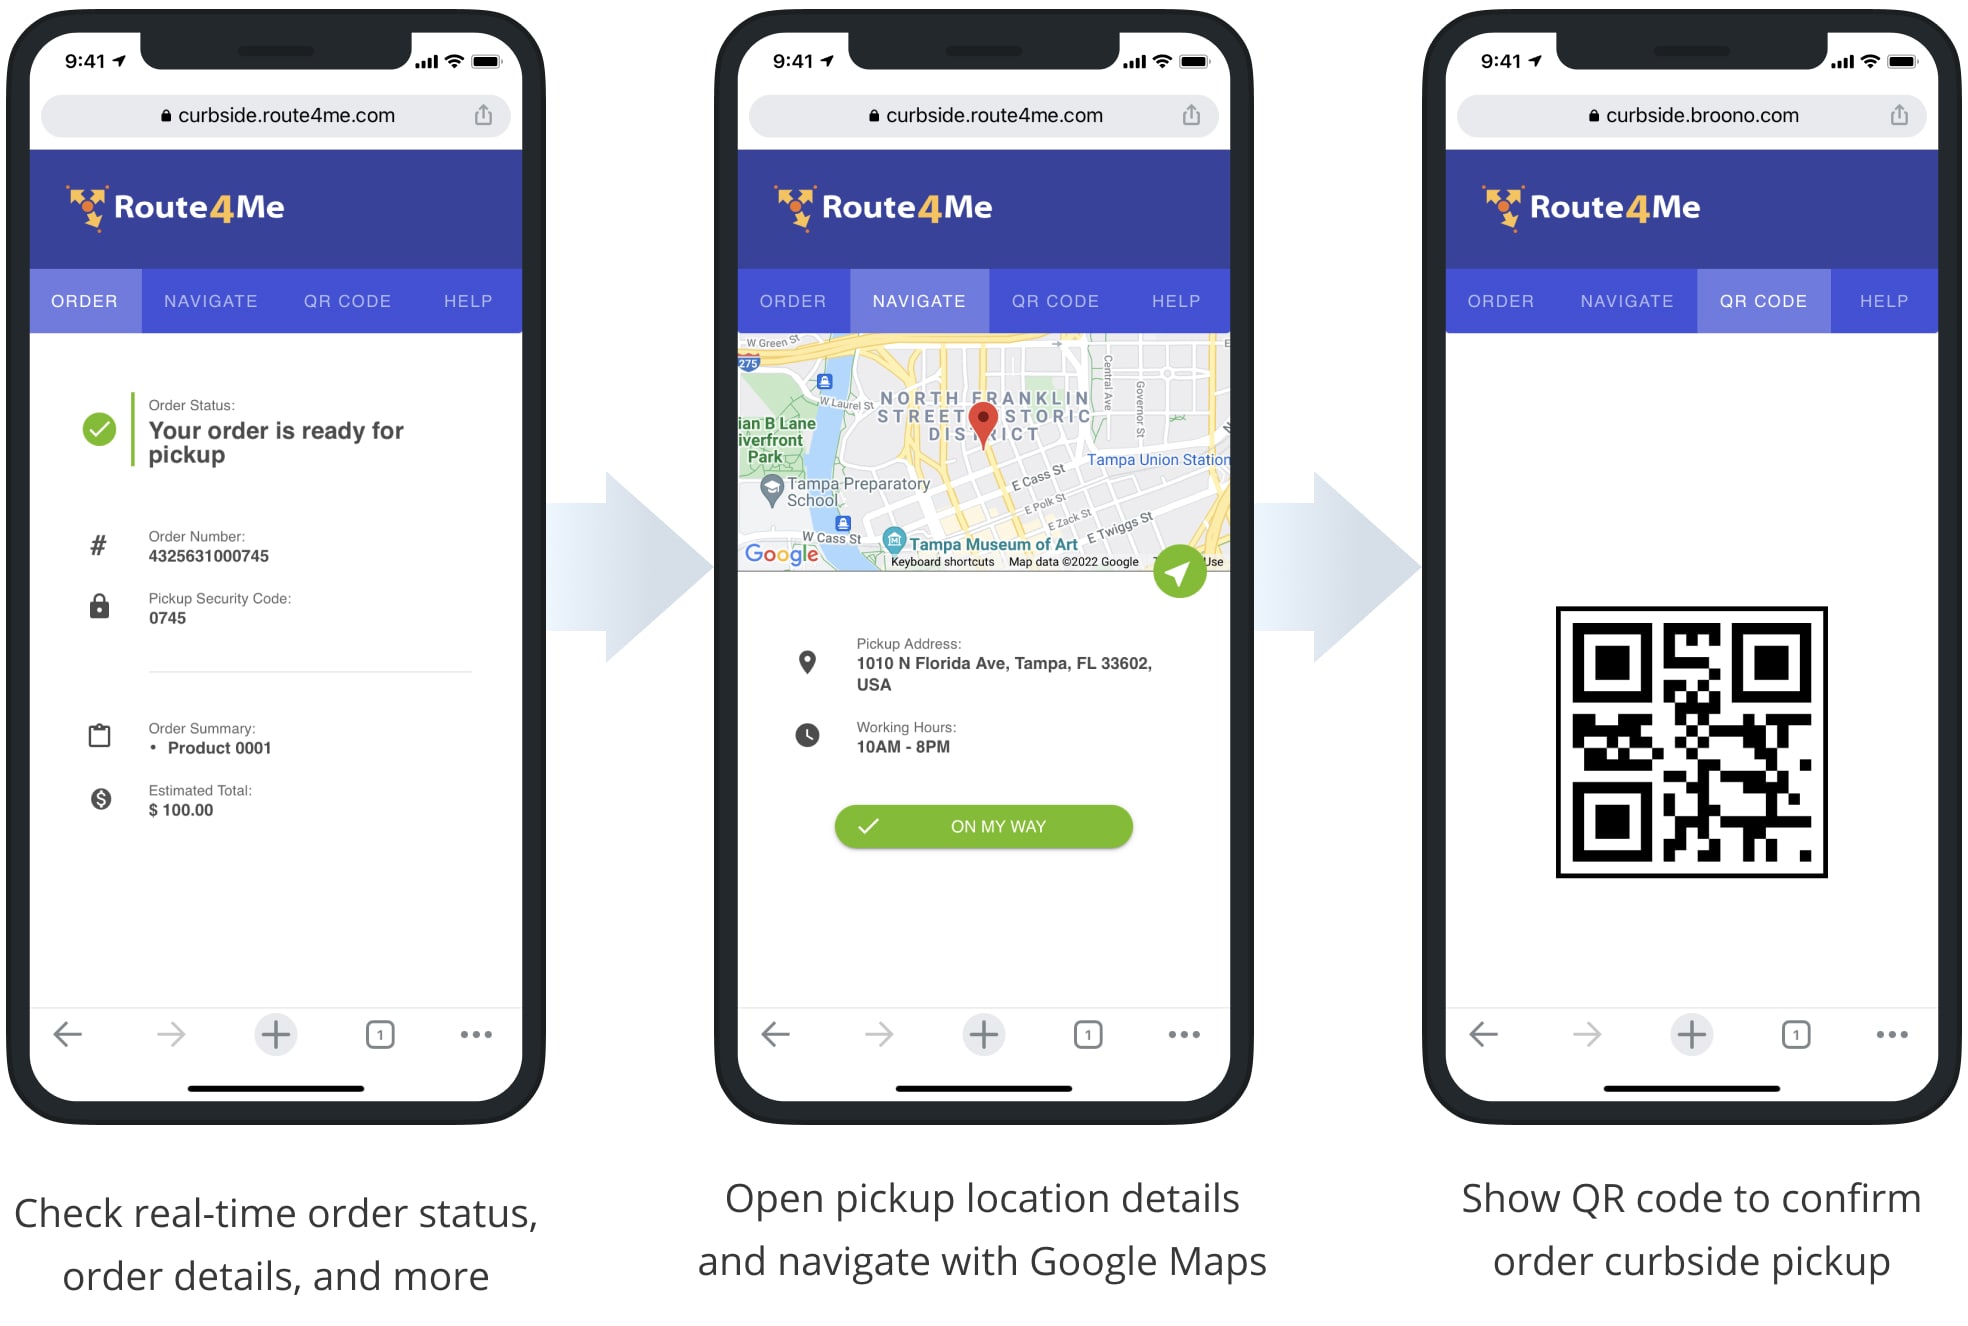 Customers can use Route4Me's Shopify order tracking page to check order status, open curbside pickup location in Google Maps, and more.